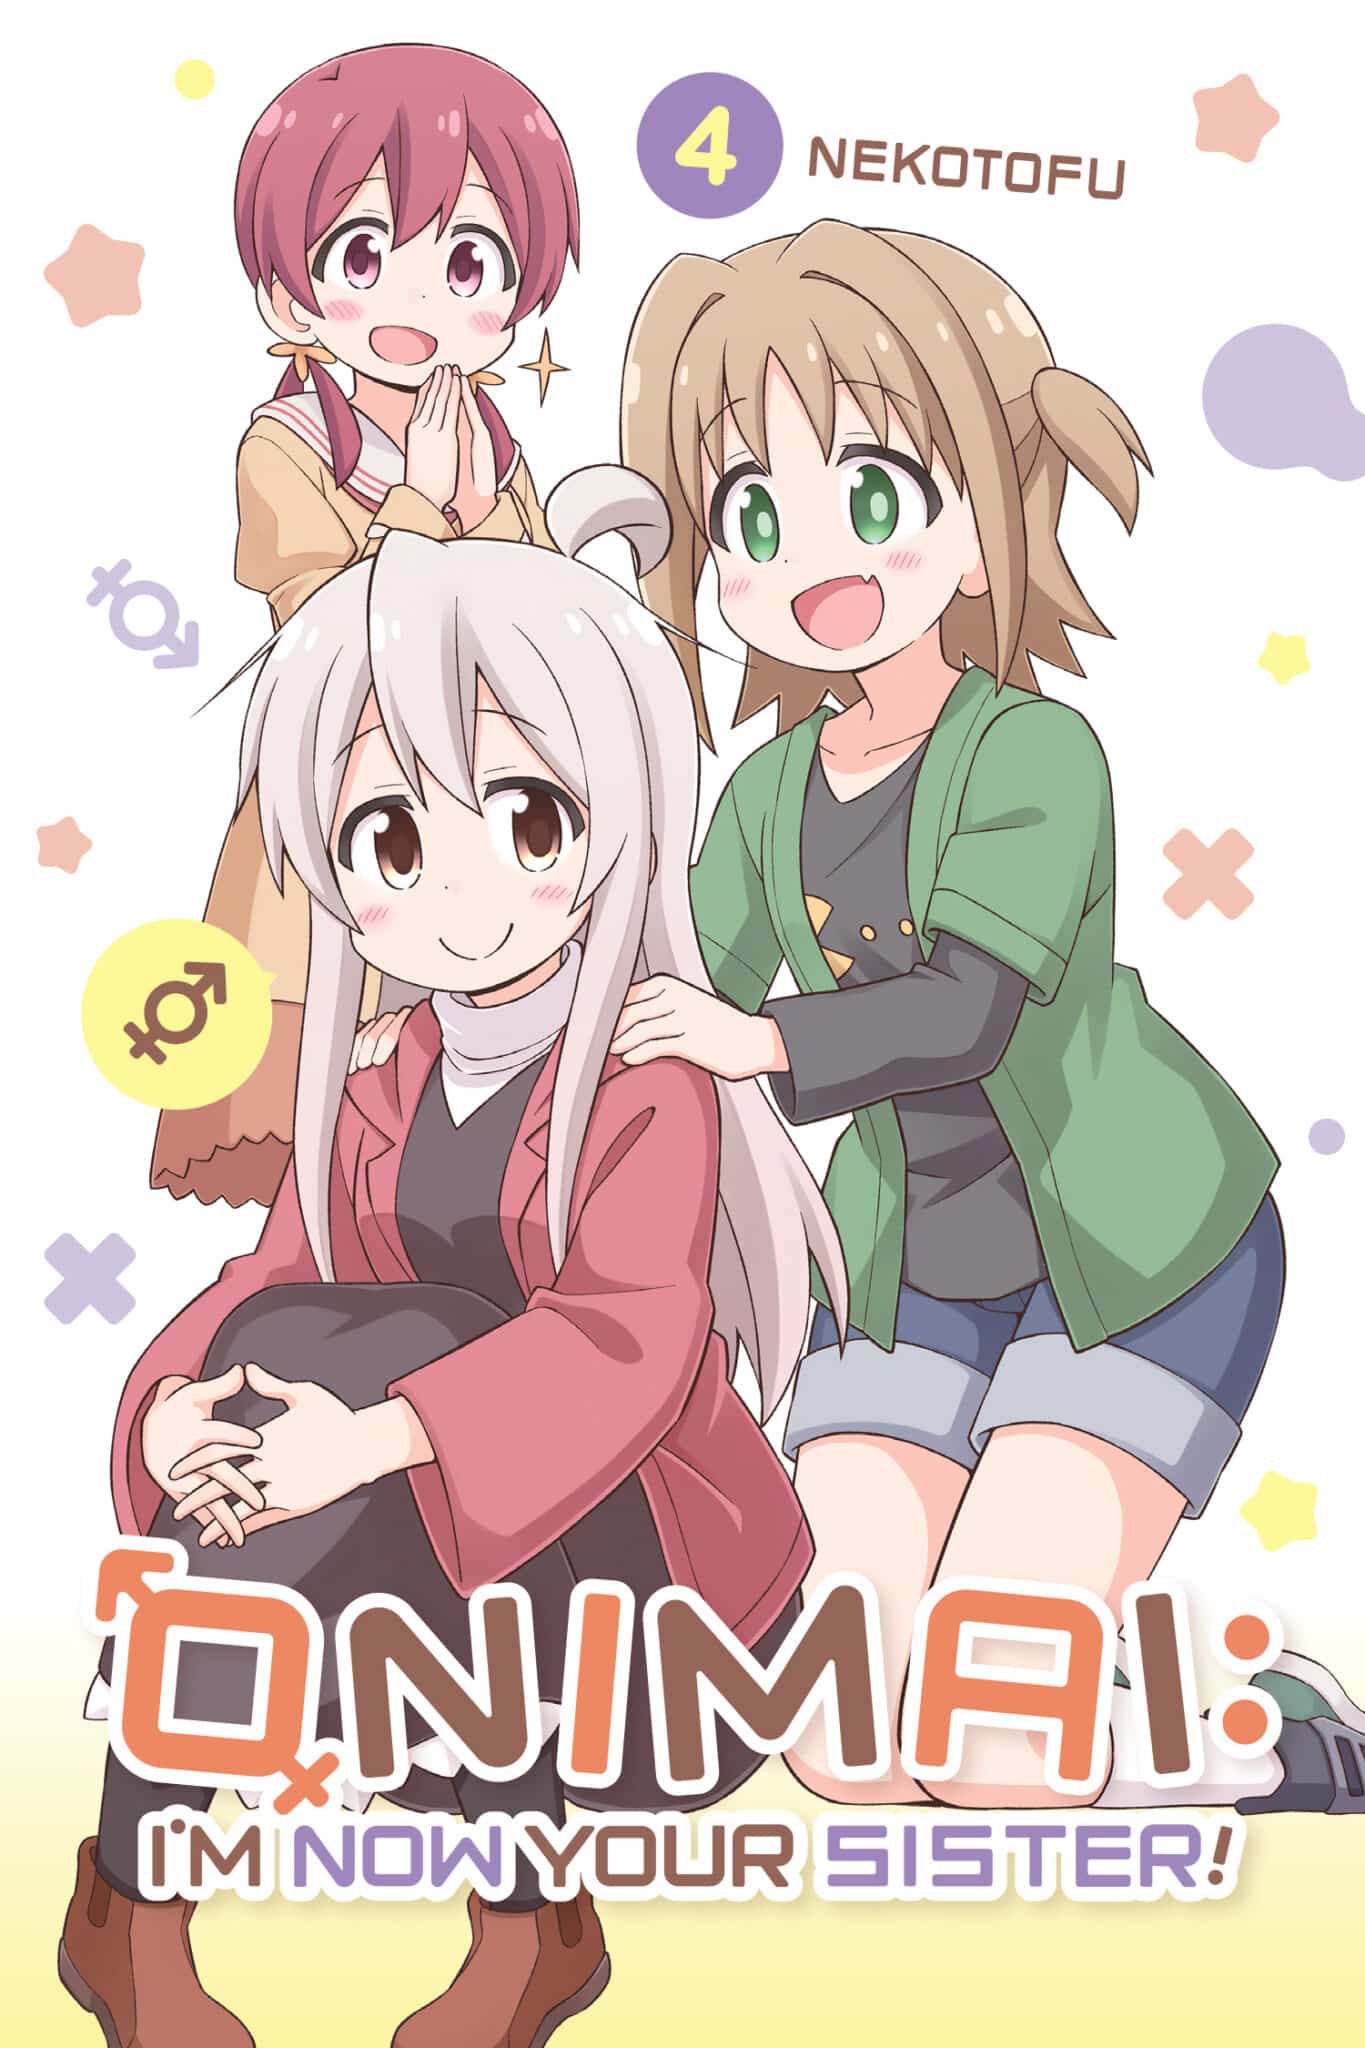 Onimai: I'm Now Your Sister! Volume 4